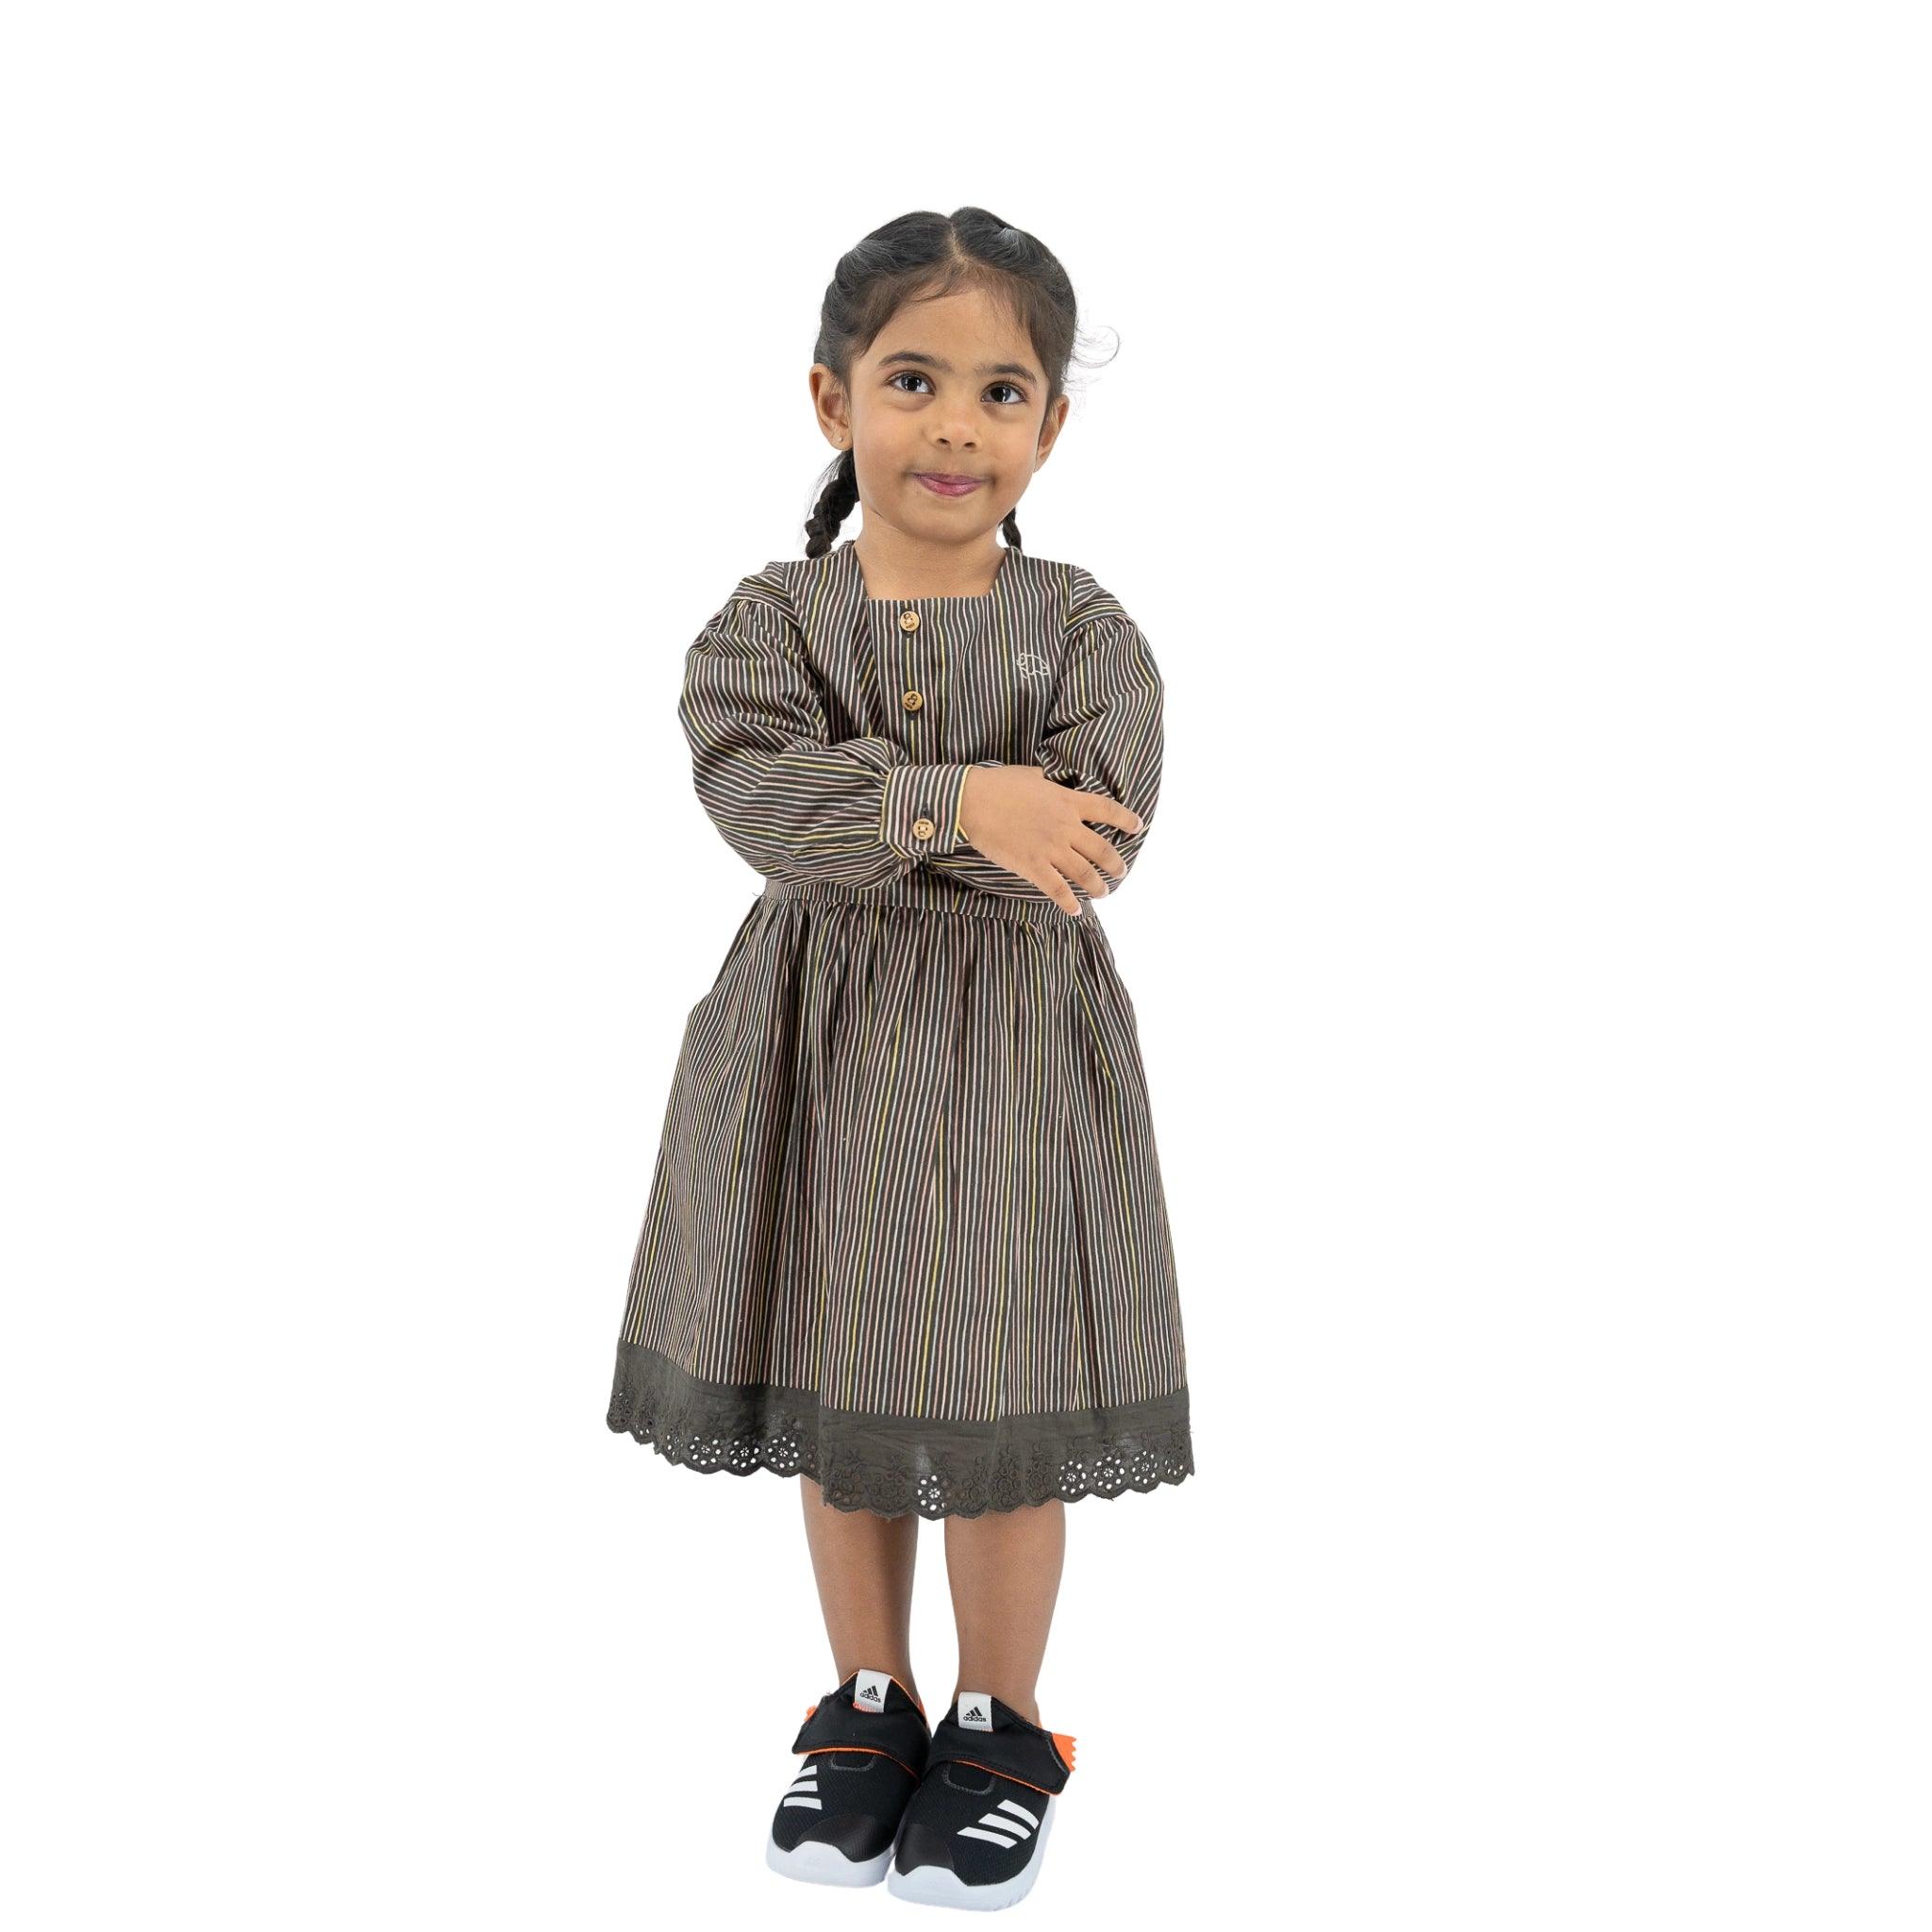 Young girl standing with arms crossed, wearing a Karee black striped full sleeve cotton dress and sneakers, smiling at the camera on a white background.